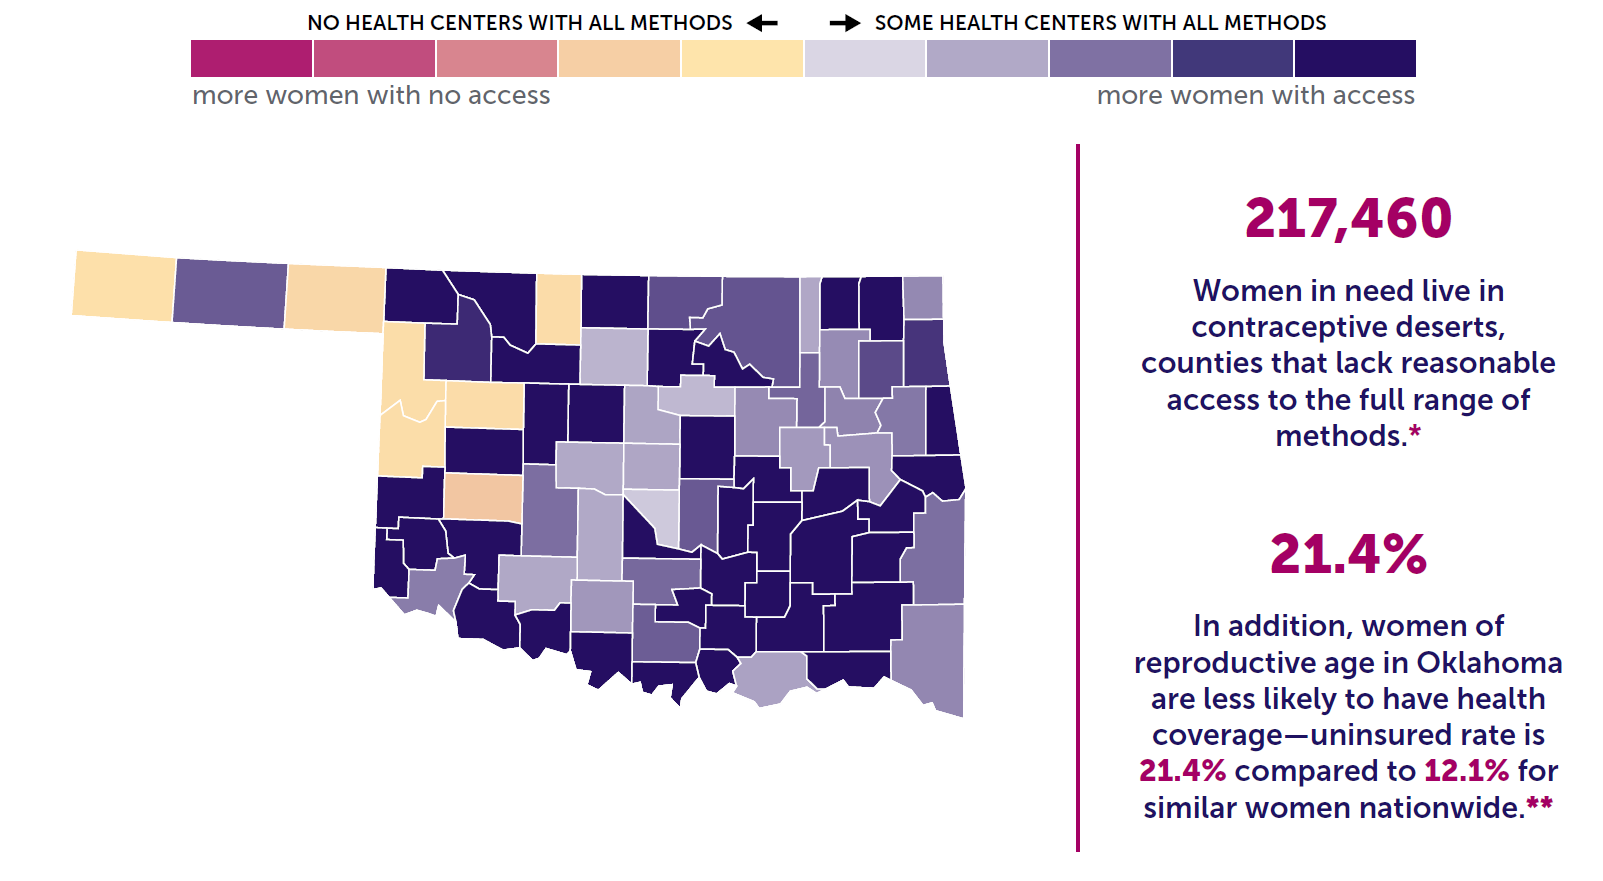 A map of Oklahoma showing the levels of contraceptive access by county. 